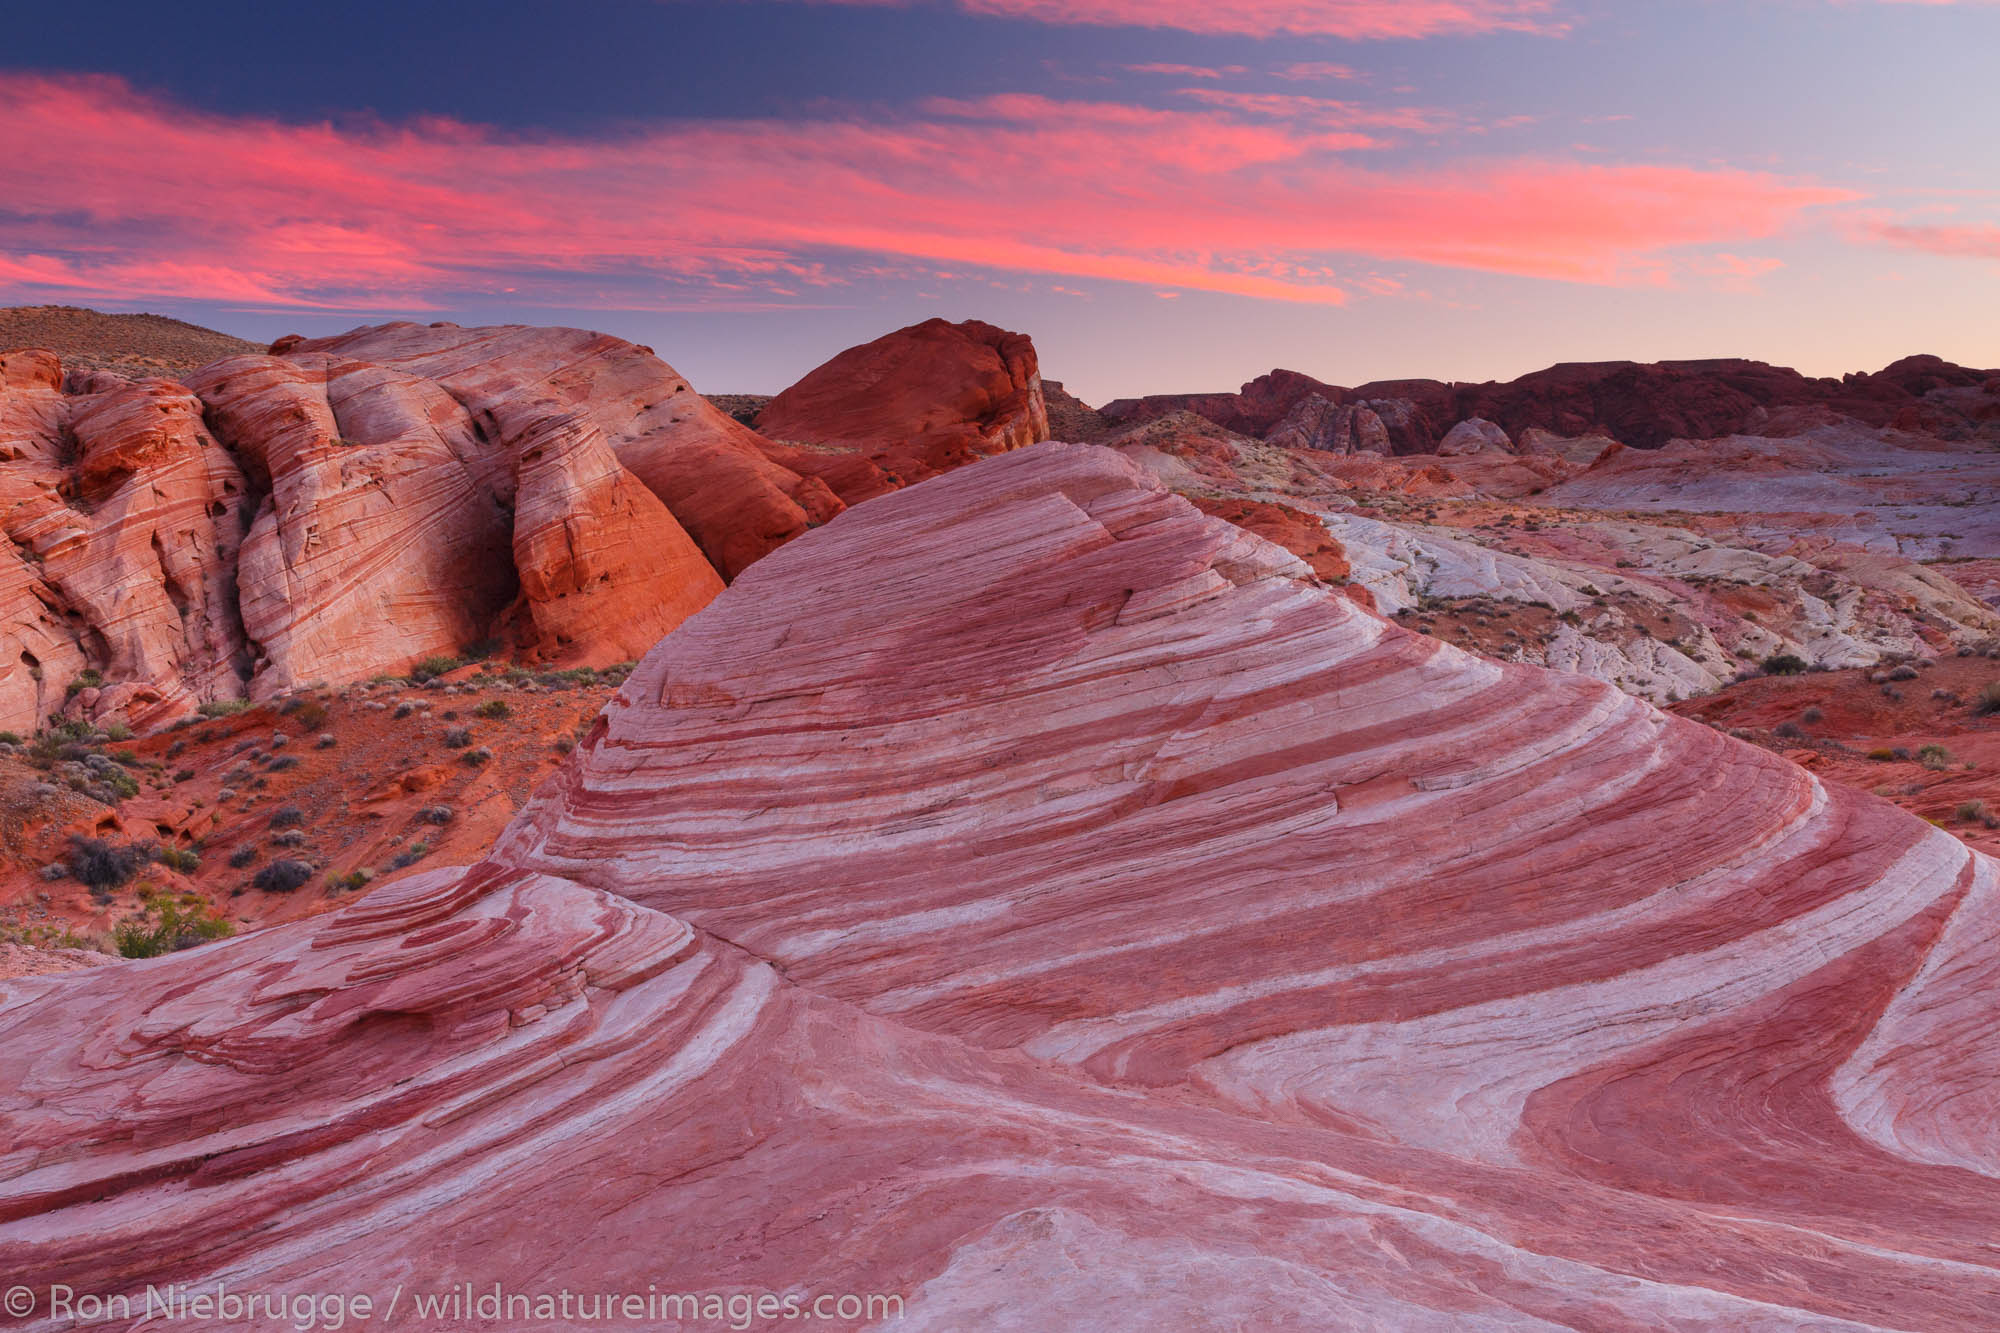 Sunset at Fire Wave, Valley of Fire State Park, not far from Las Vegas, Nevada.